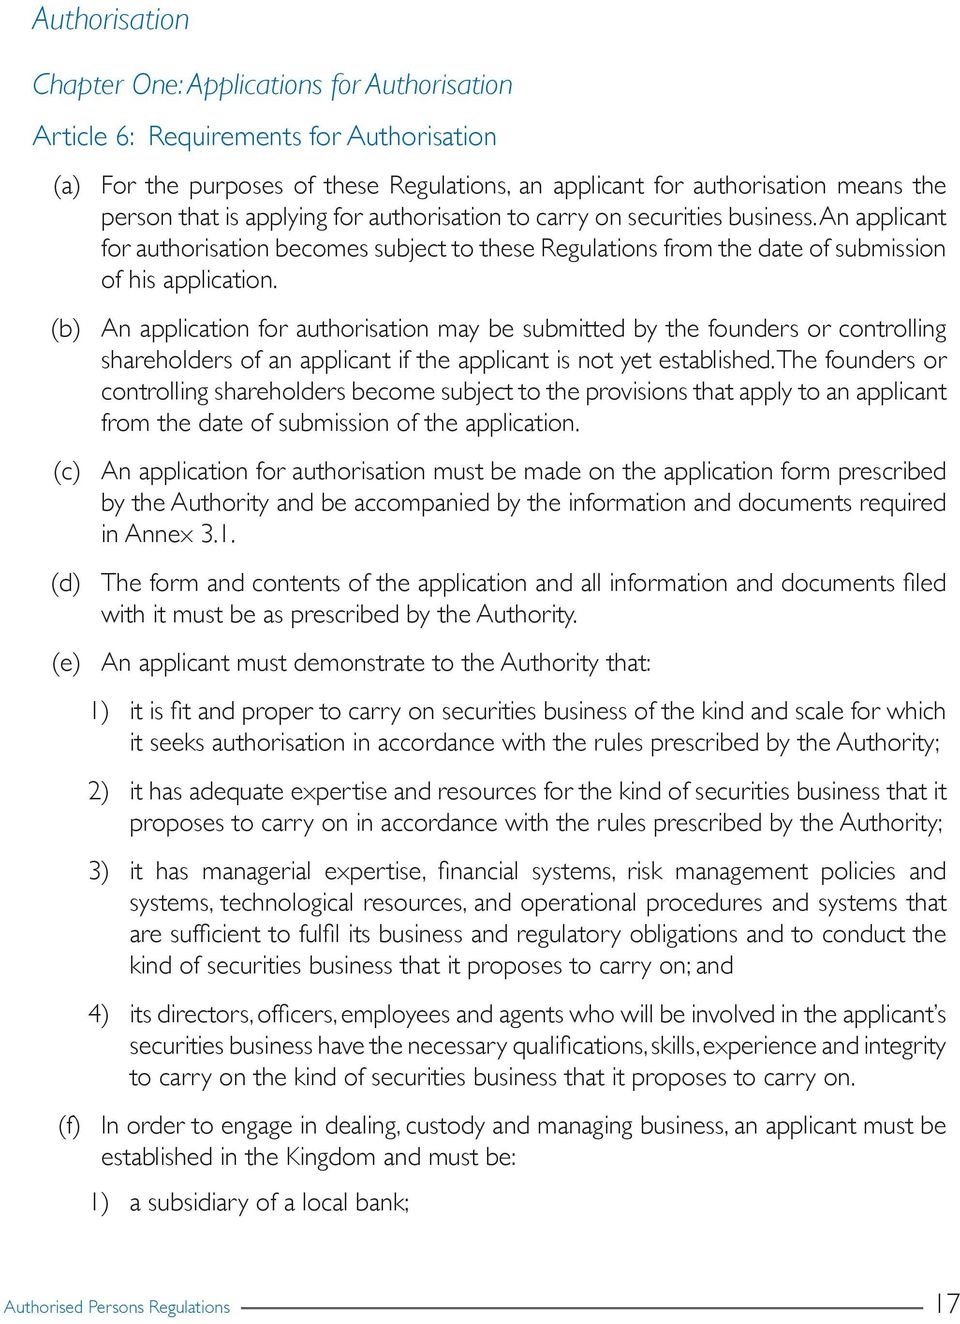 (b) An application for authorisation may be submitted by the founders or controlling shareholders of an applicant if the applicant is not yet established.